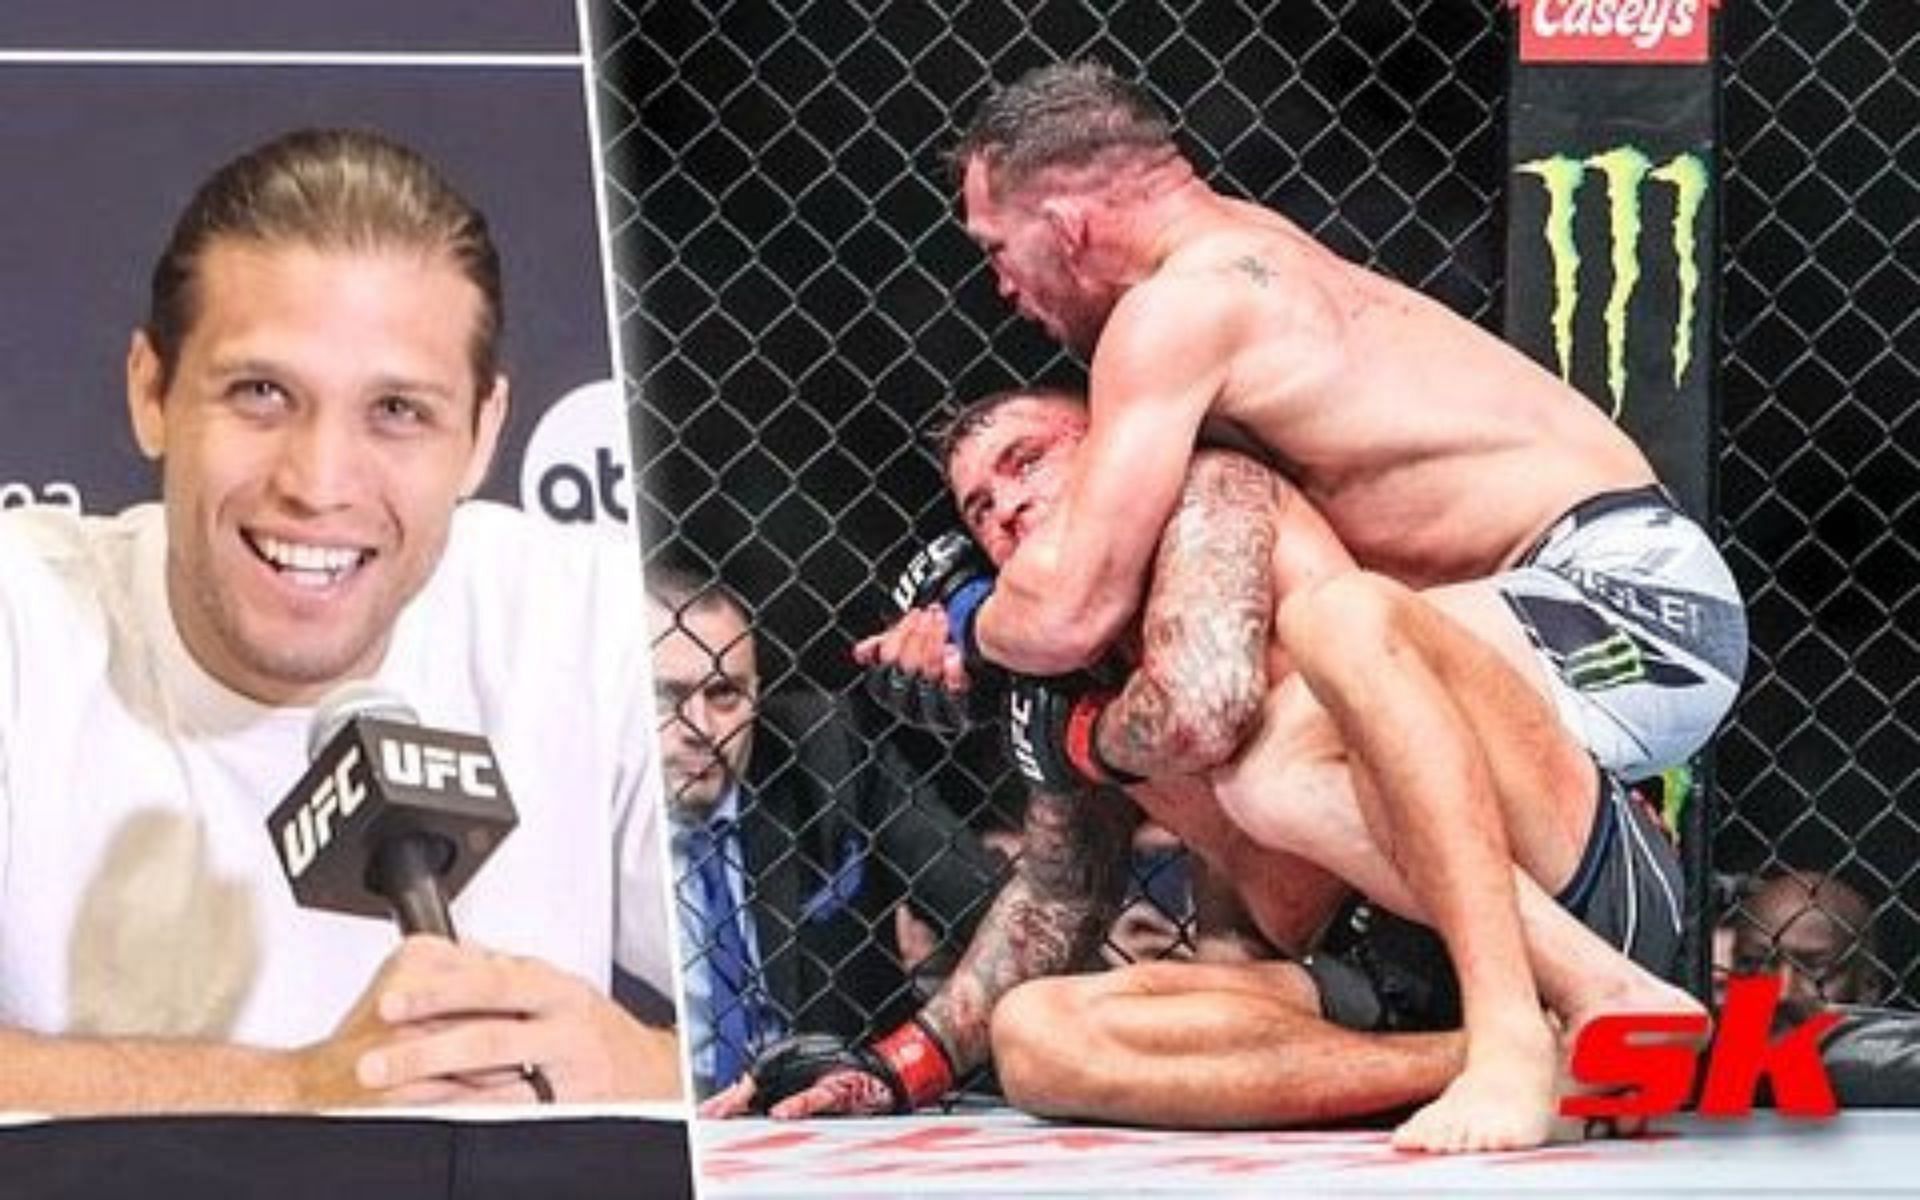 Brian Ortega hilariously reacts to Michael Chandler trying to submit Dustin  Poirier by unfairly fish-hooking him